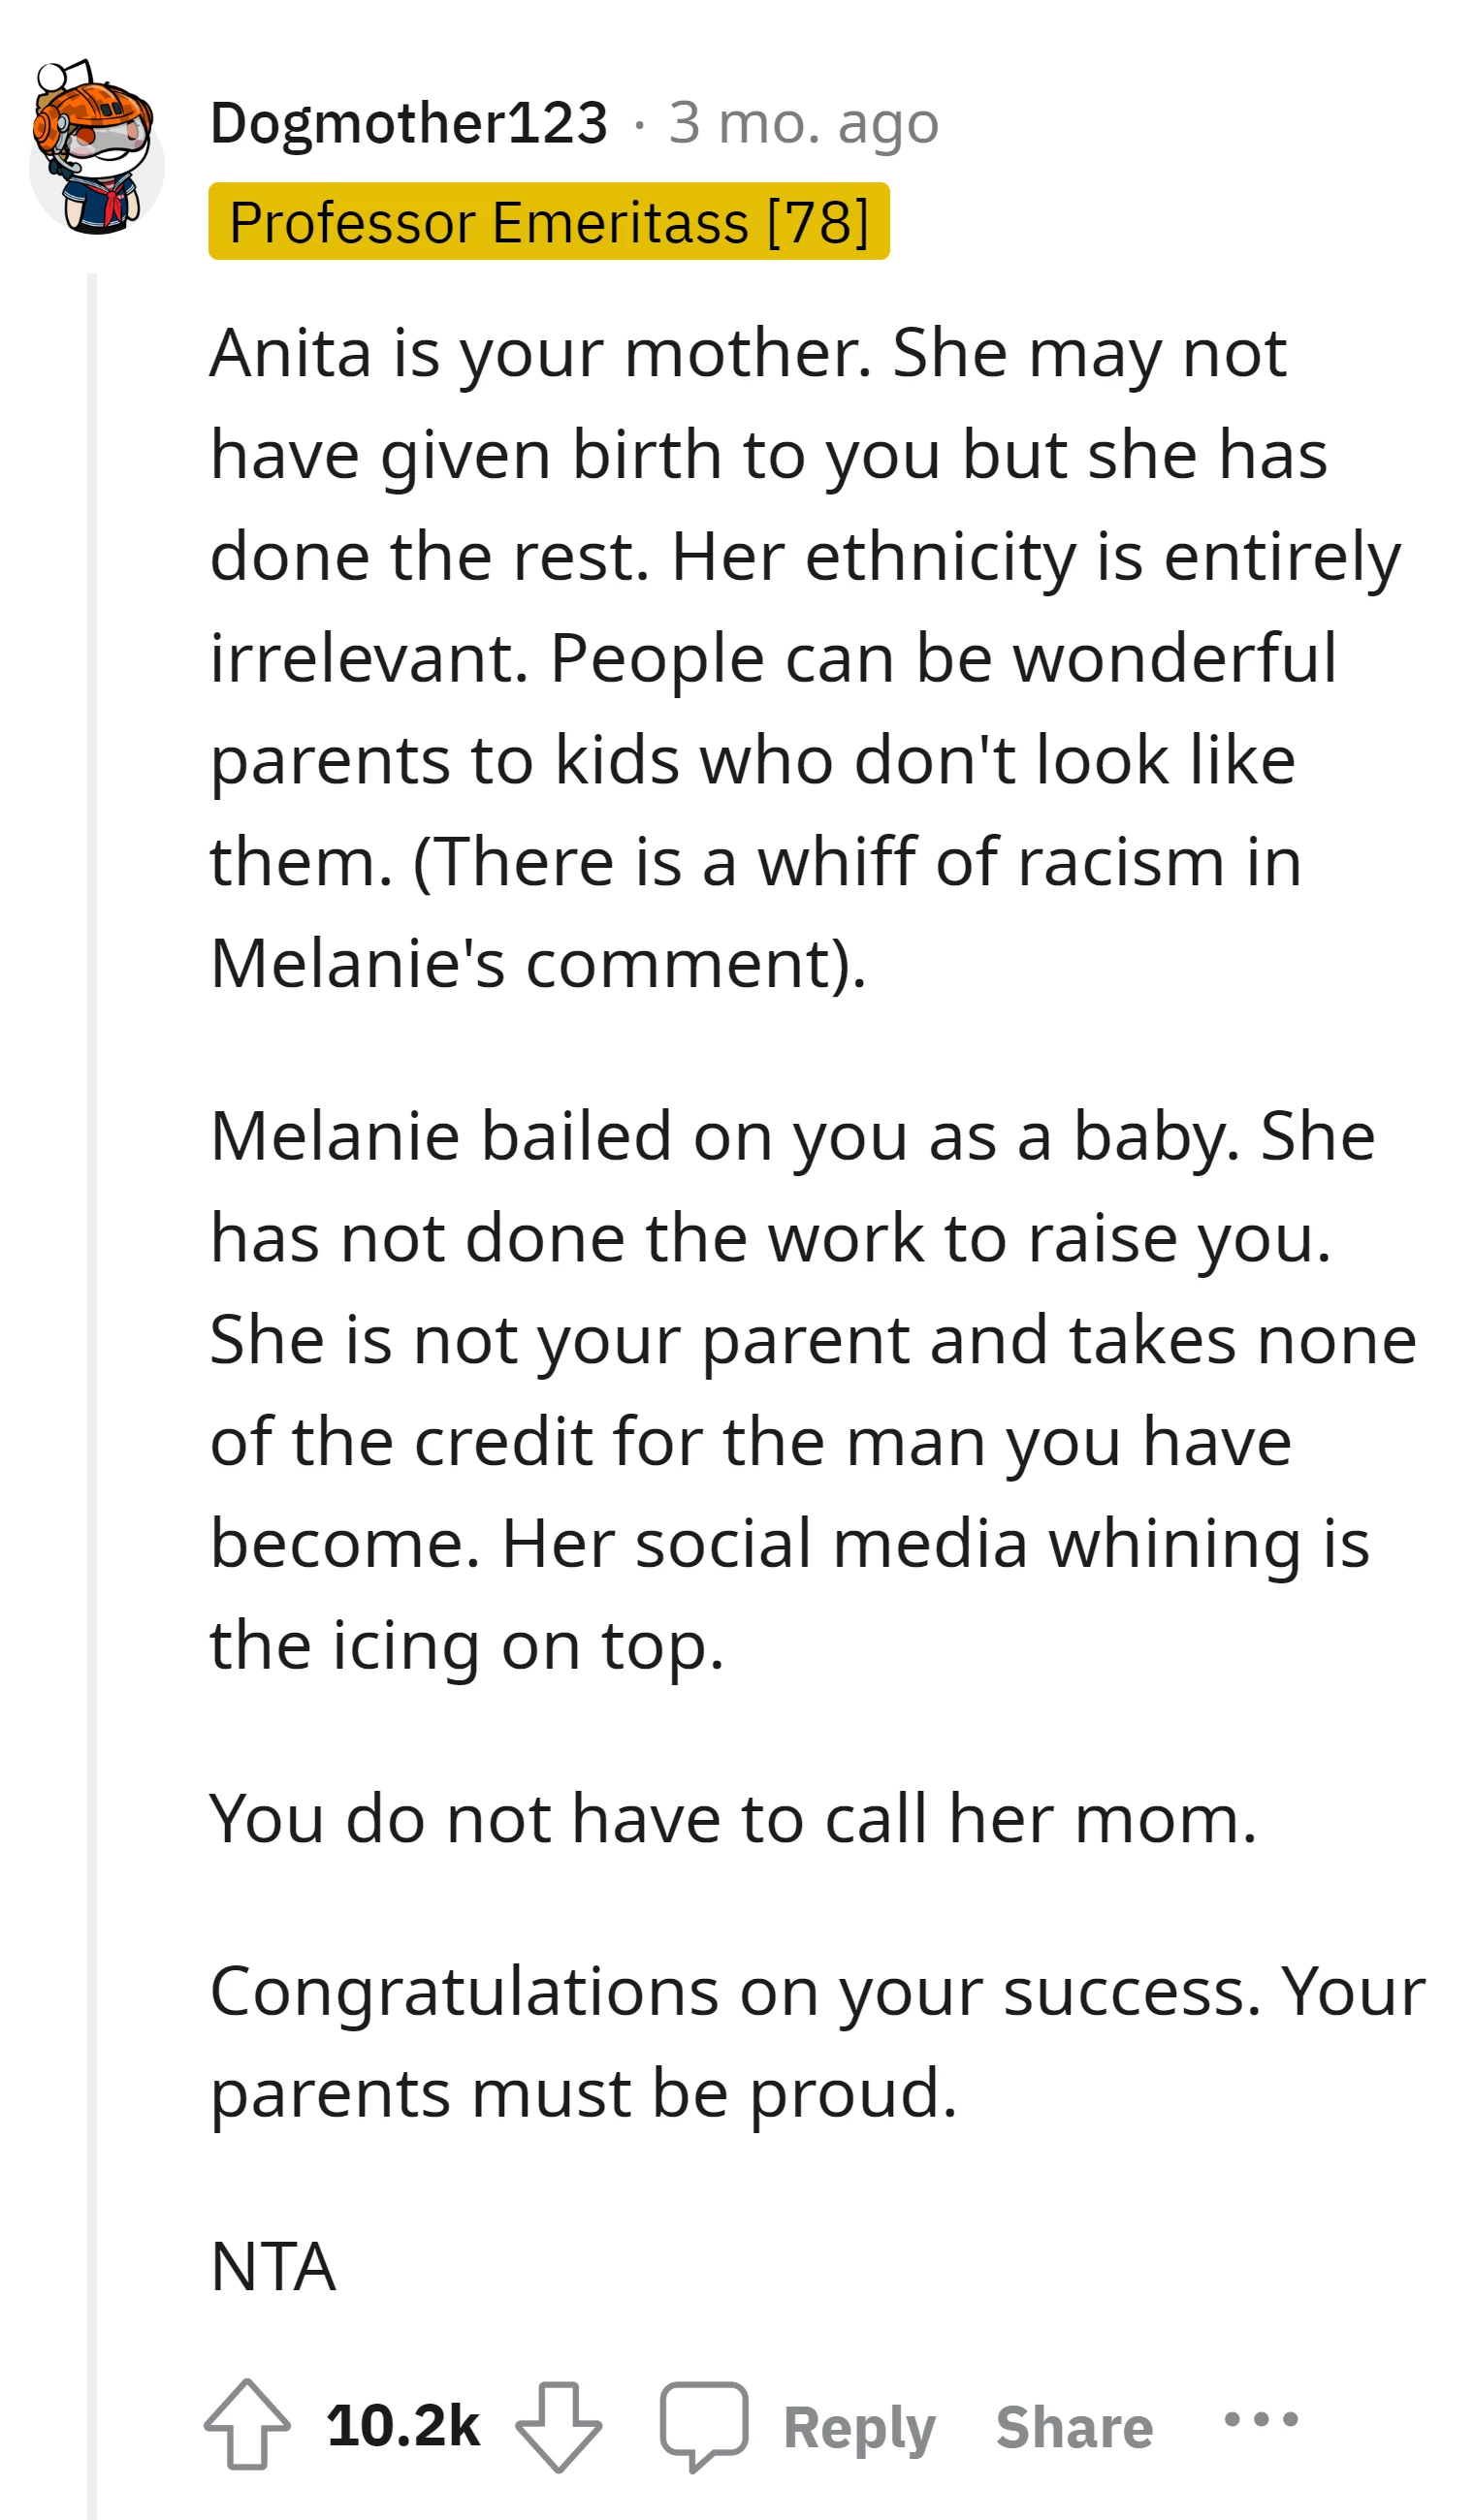 OP's bio mom's claims is unjustified and potentially racist